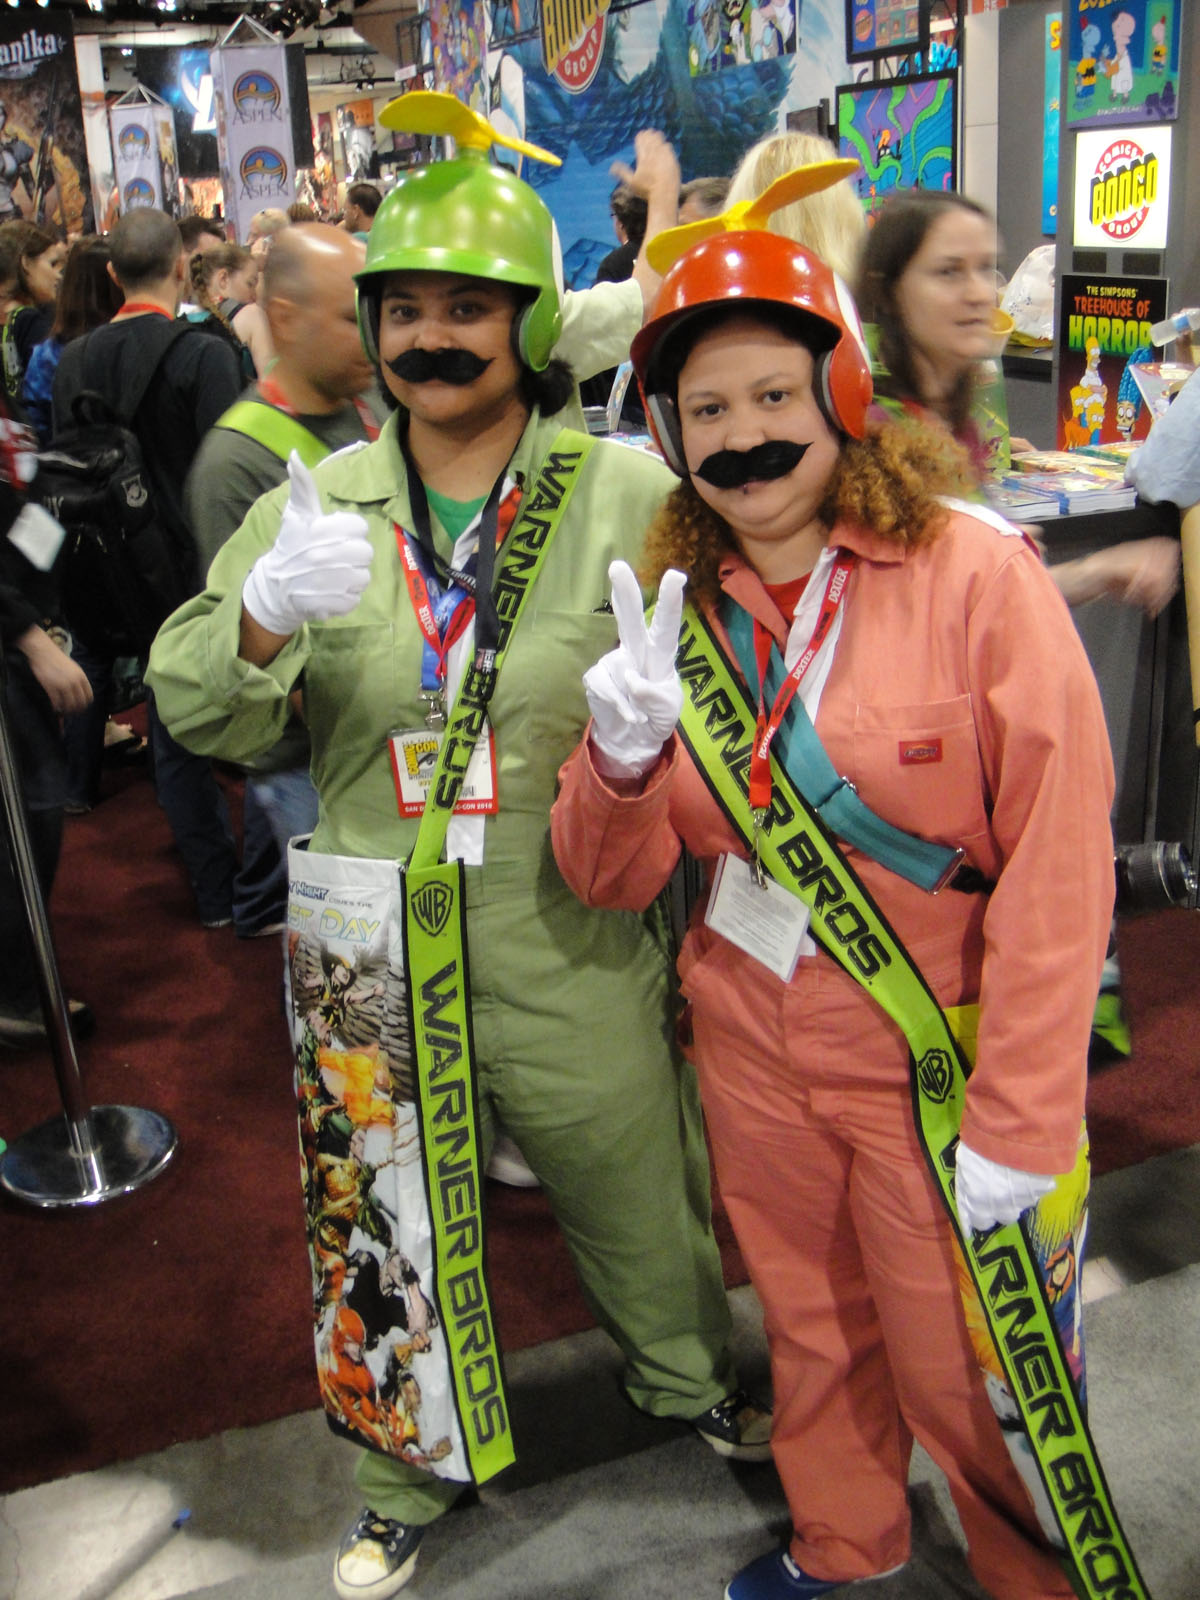 two people dressed as characters in costumes for a convention